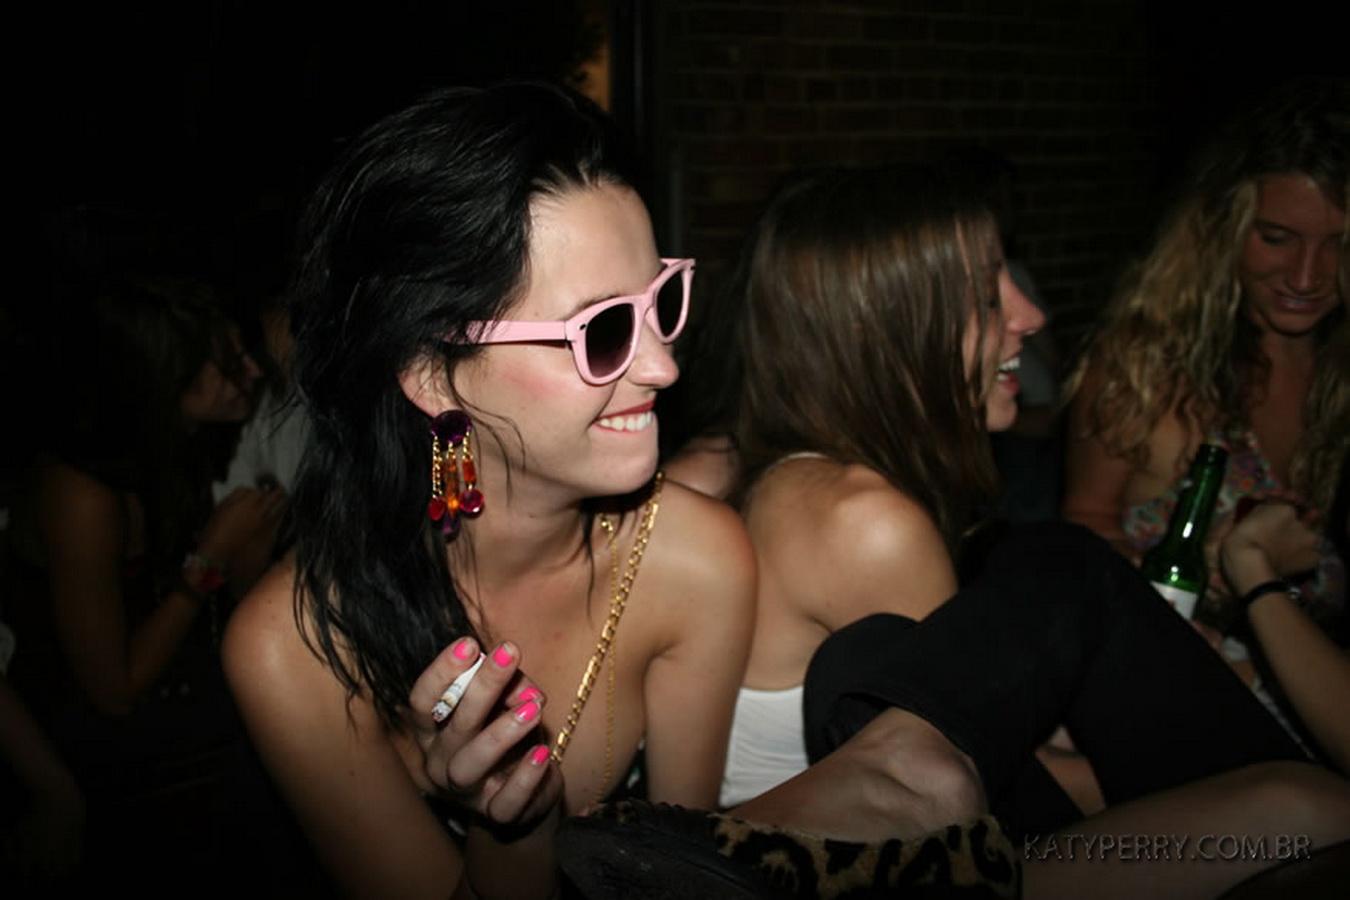 Katy_Perry_bobsslip_drunk_cleavage_downblouse_upskirt_nipslip_at_her_birthday_2007_party_99x_HQ_42.jpg